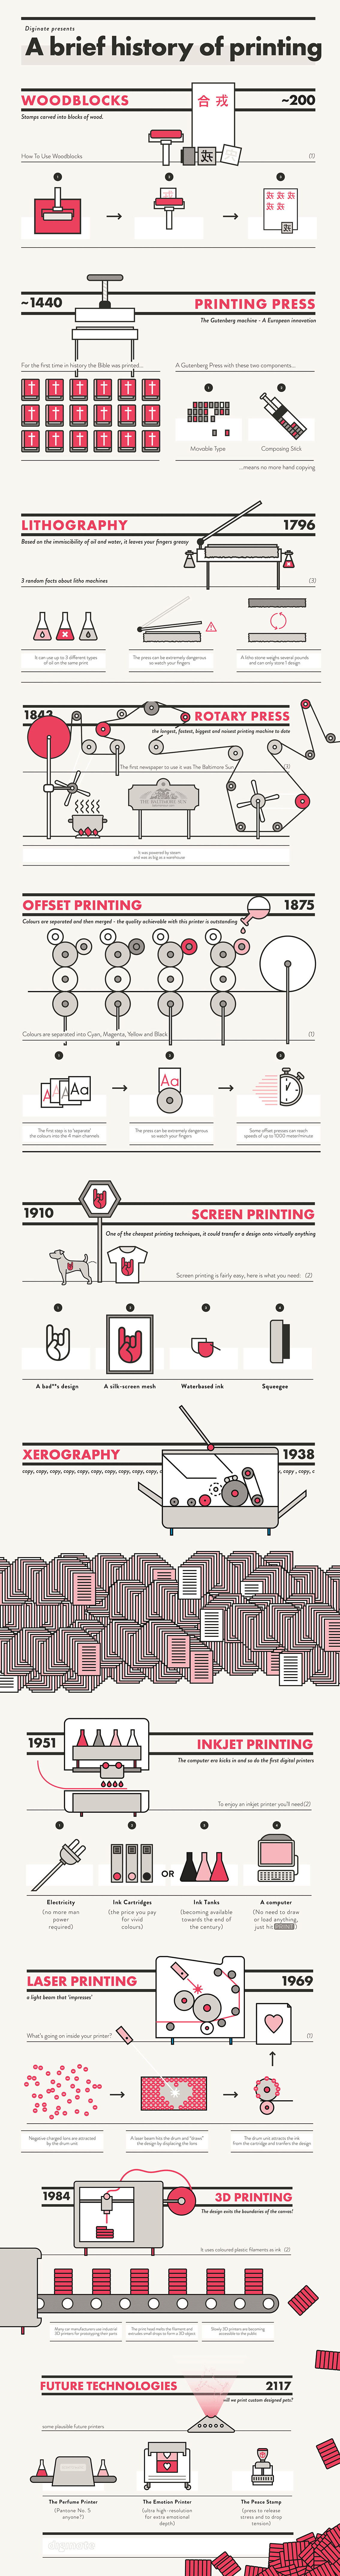 The Evolution of Printing Technology Infographic